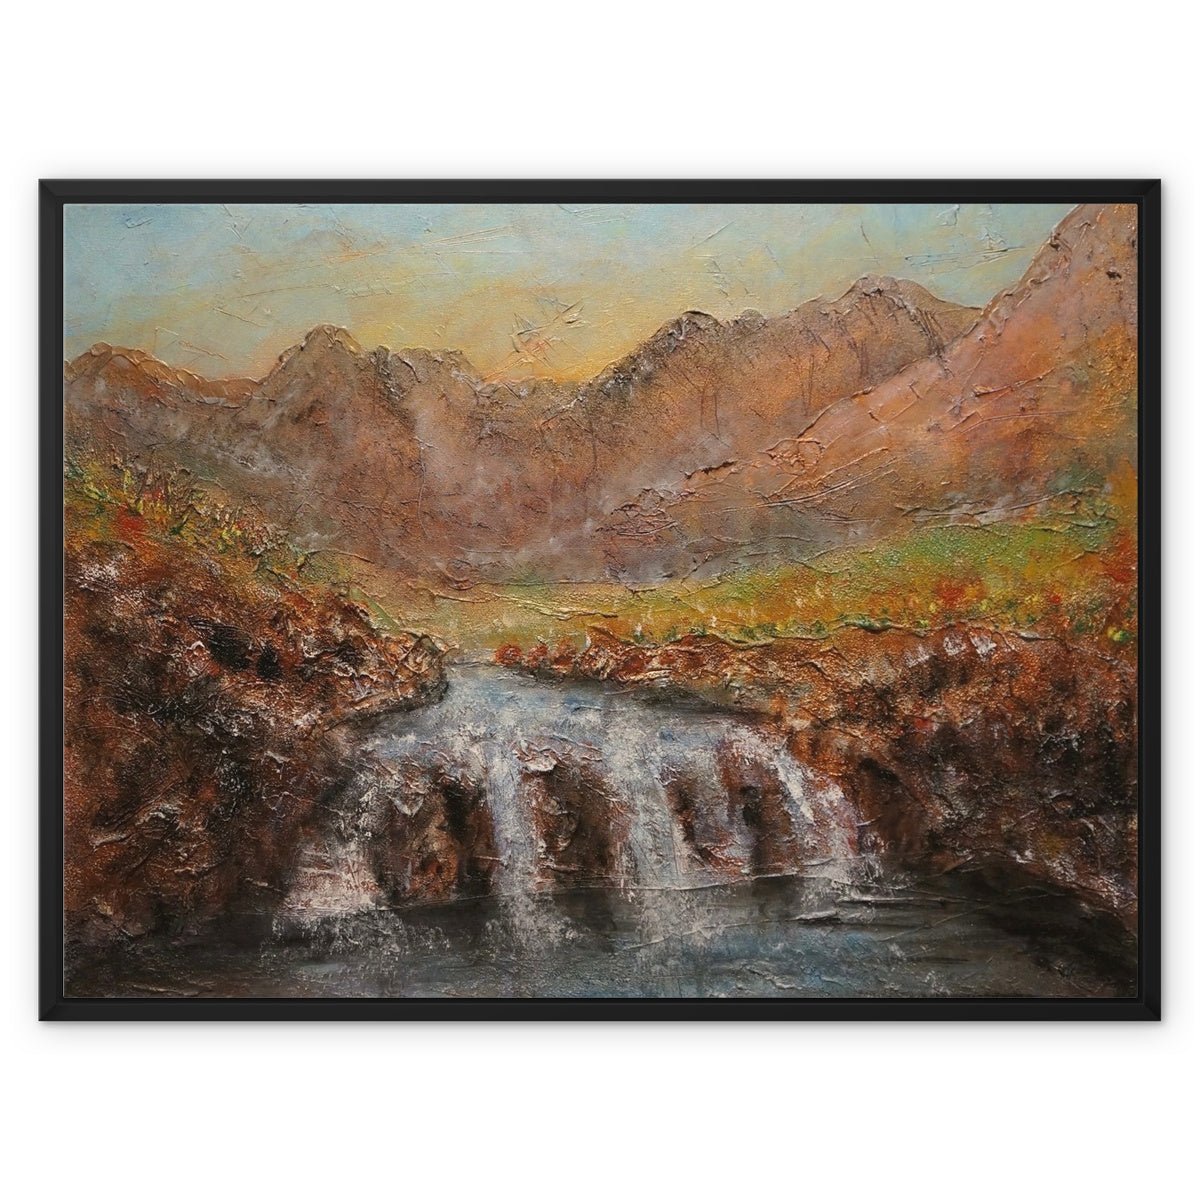 Fairy Pools Dawn Skye Painting | Framed Canvas From Scotland-Floating Framed Canvas Prints-Skye Art Gallery-32"x24"-Black Frame-Paintings, Prints, Homeware, Art Gifts From Scotland By Scottish Artist Kevin Hunter